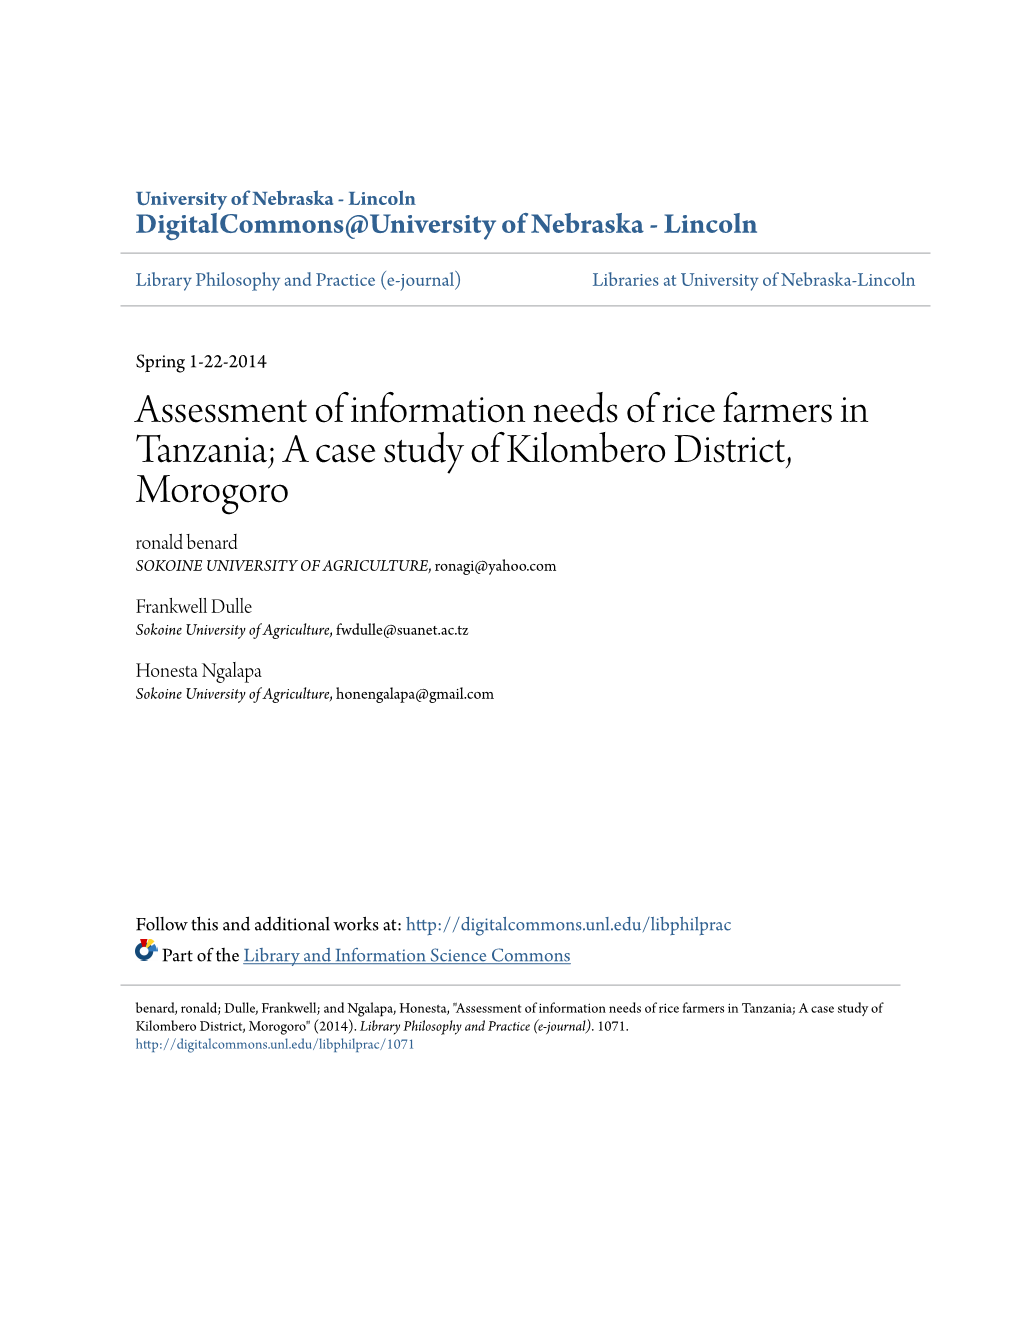 Assessment of Information Needs of Rice Farmers in Tanzania